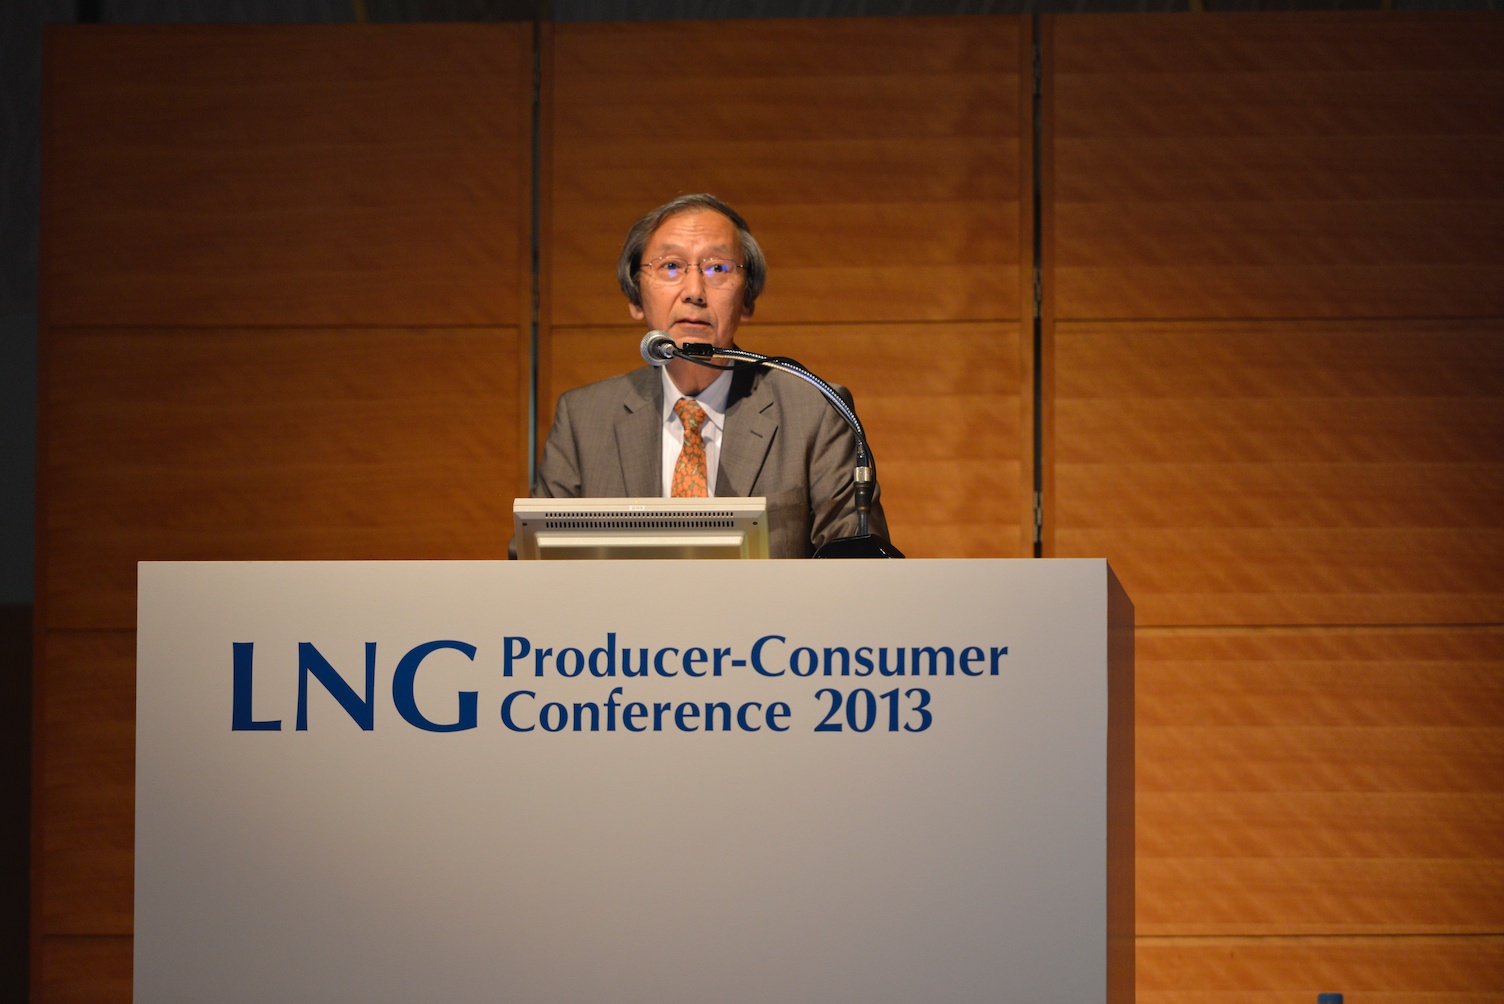 LNG Producer Consumer Conference 2013  (3)  09 10 2013